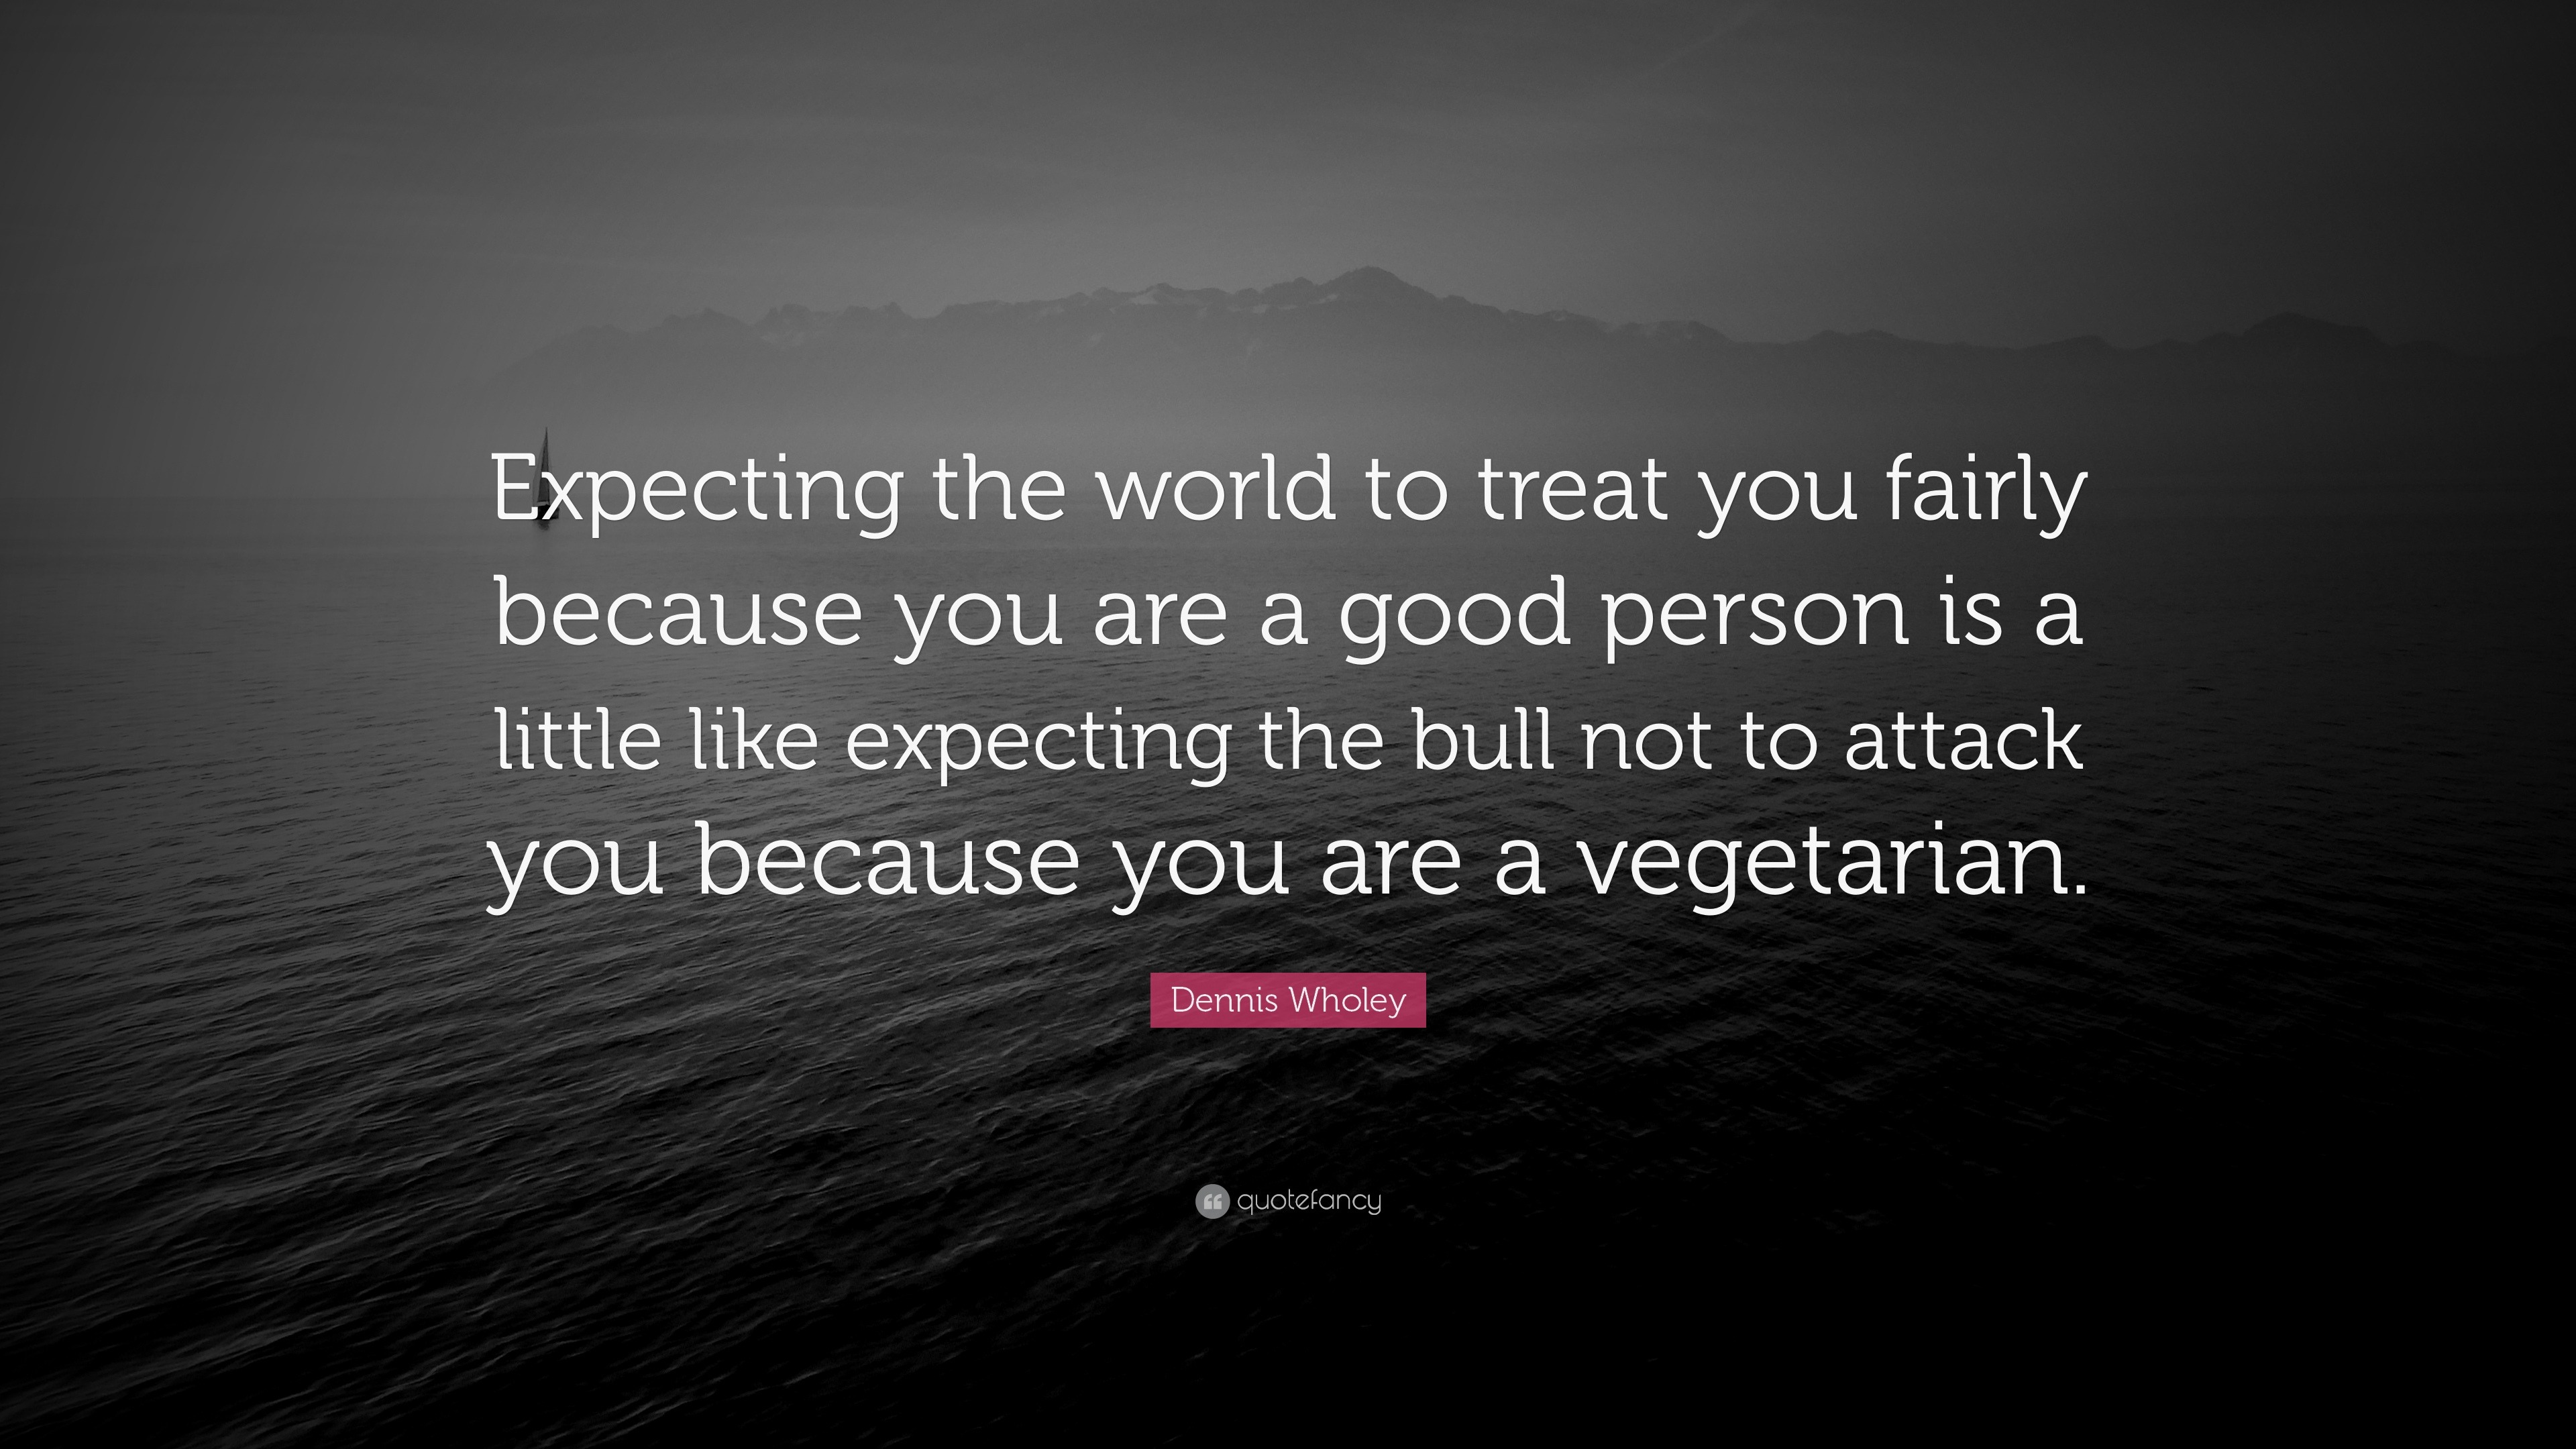 Dennis Wholey Quote “Expecting the world to treat you fairly because you are a